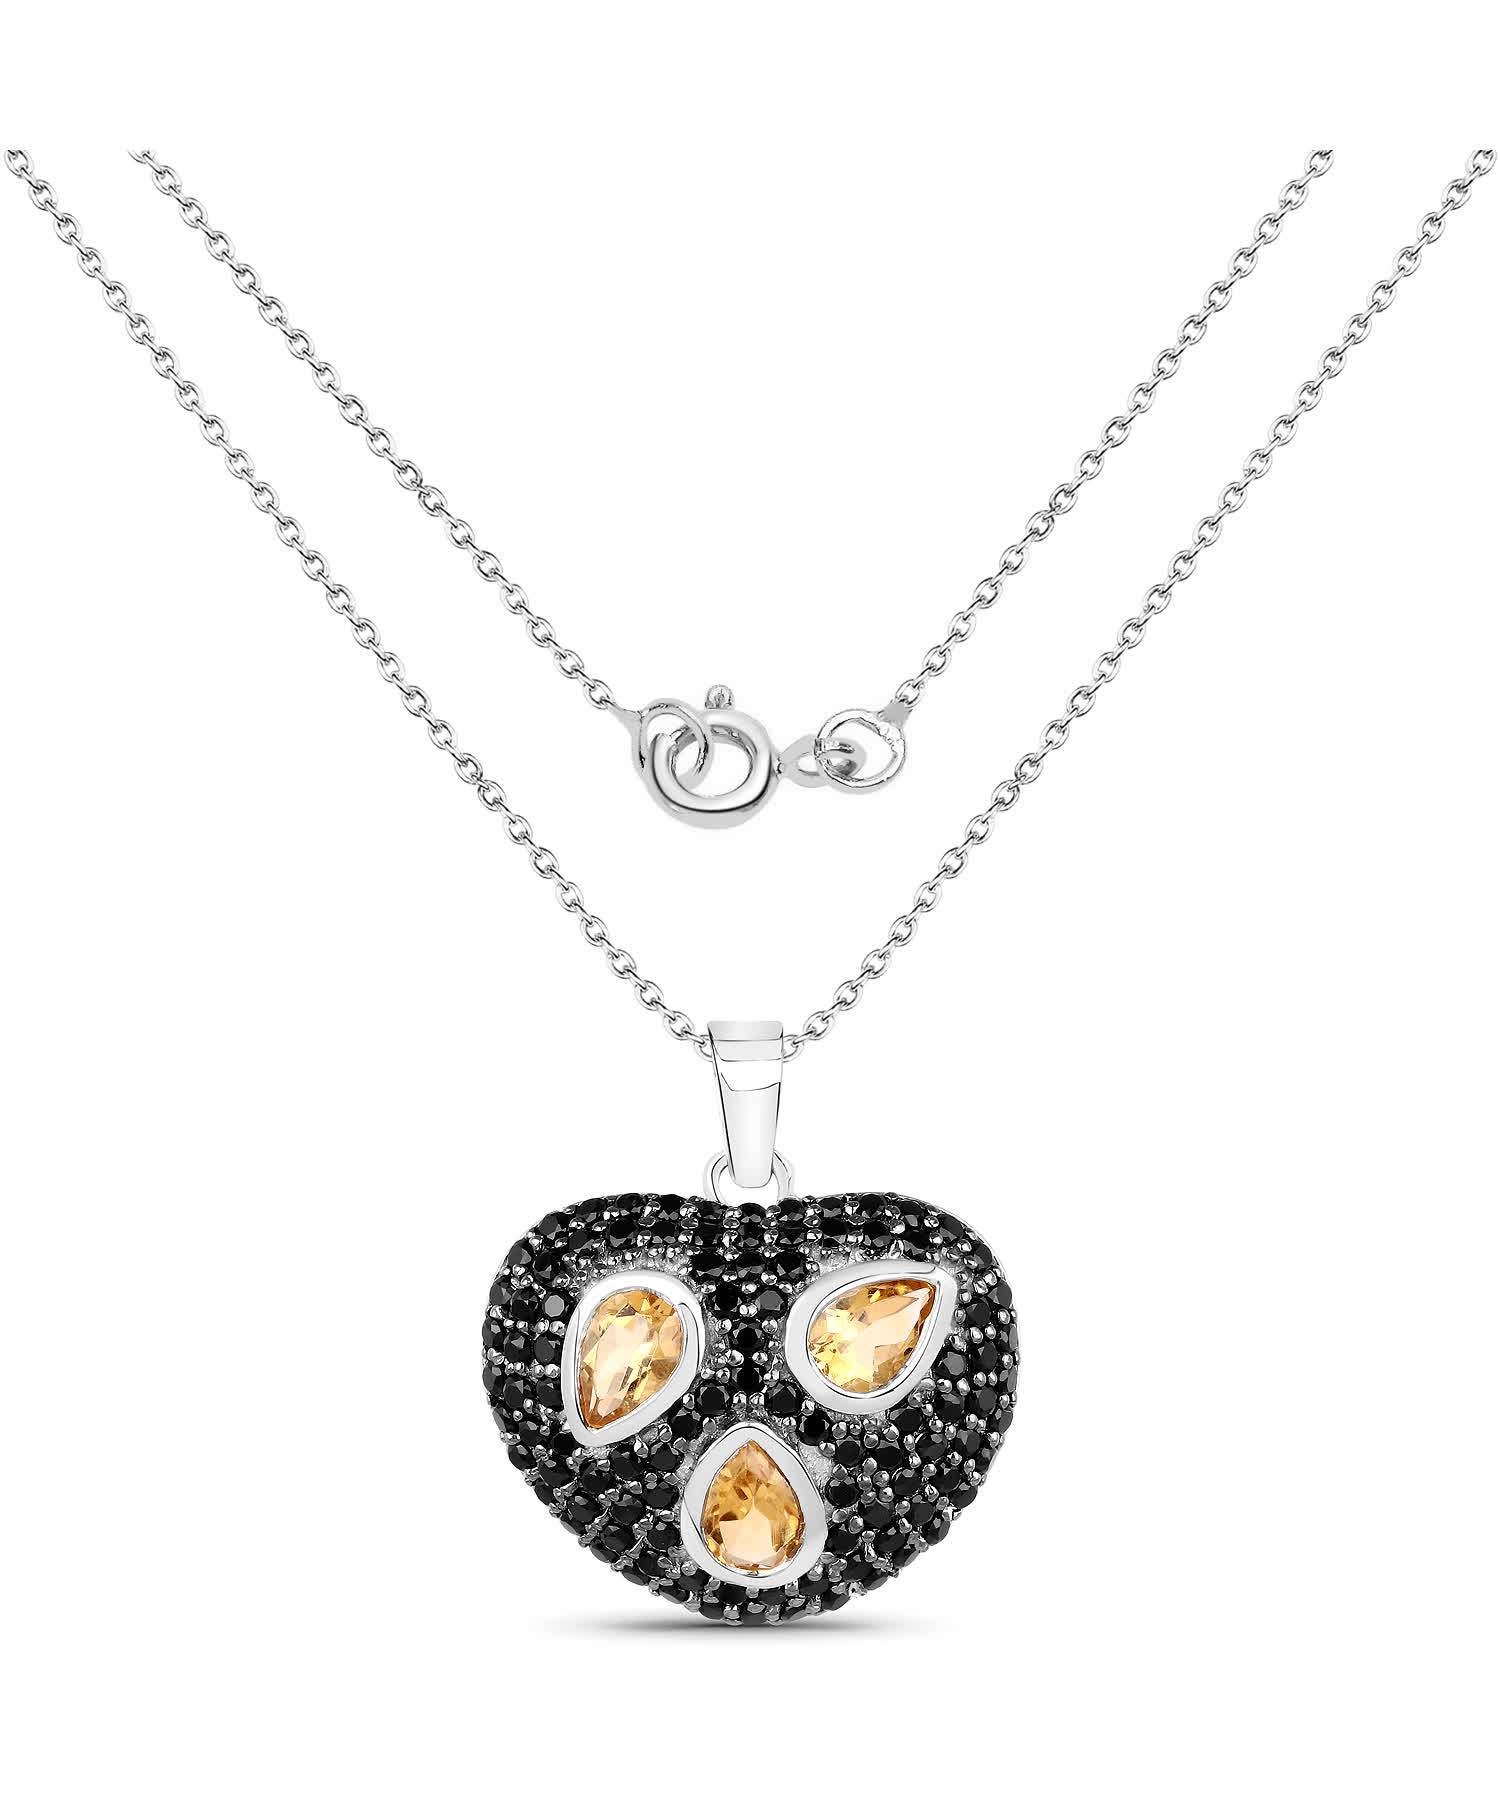 2.94ctw Natural Citrine and Black Spinel Rhodium Plated 925 Sterling Silver Heart Pendant With Chain View 2